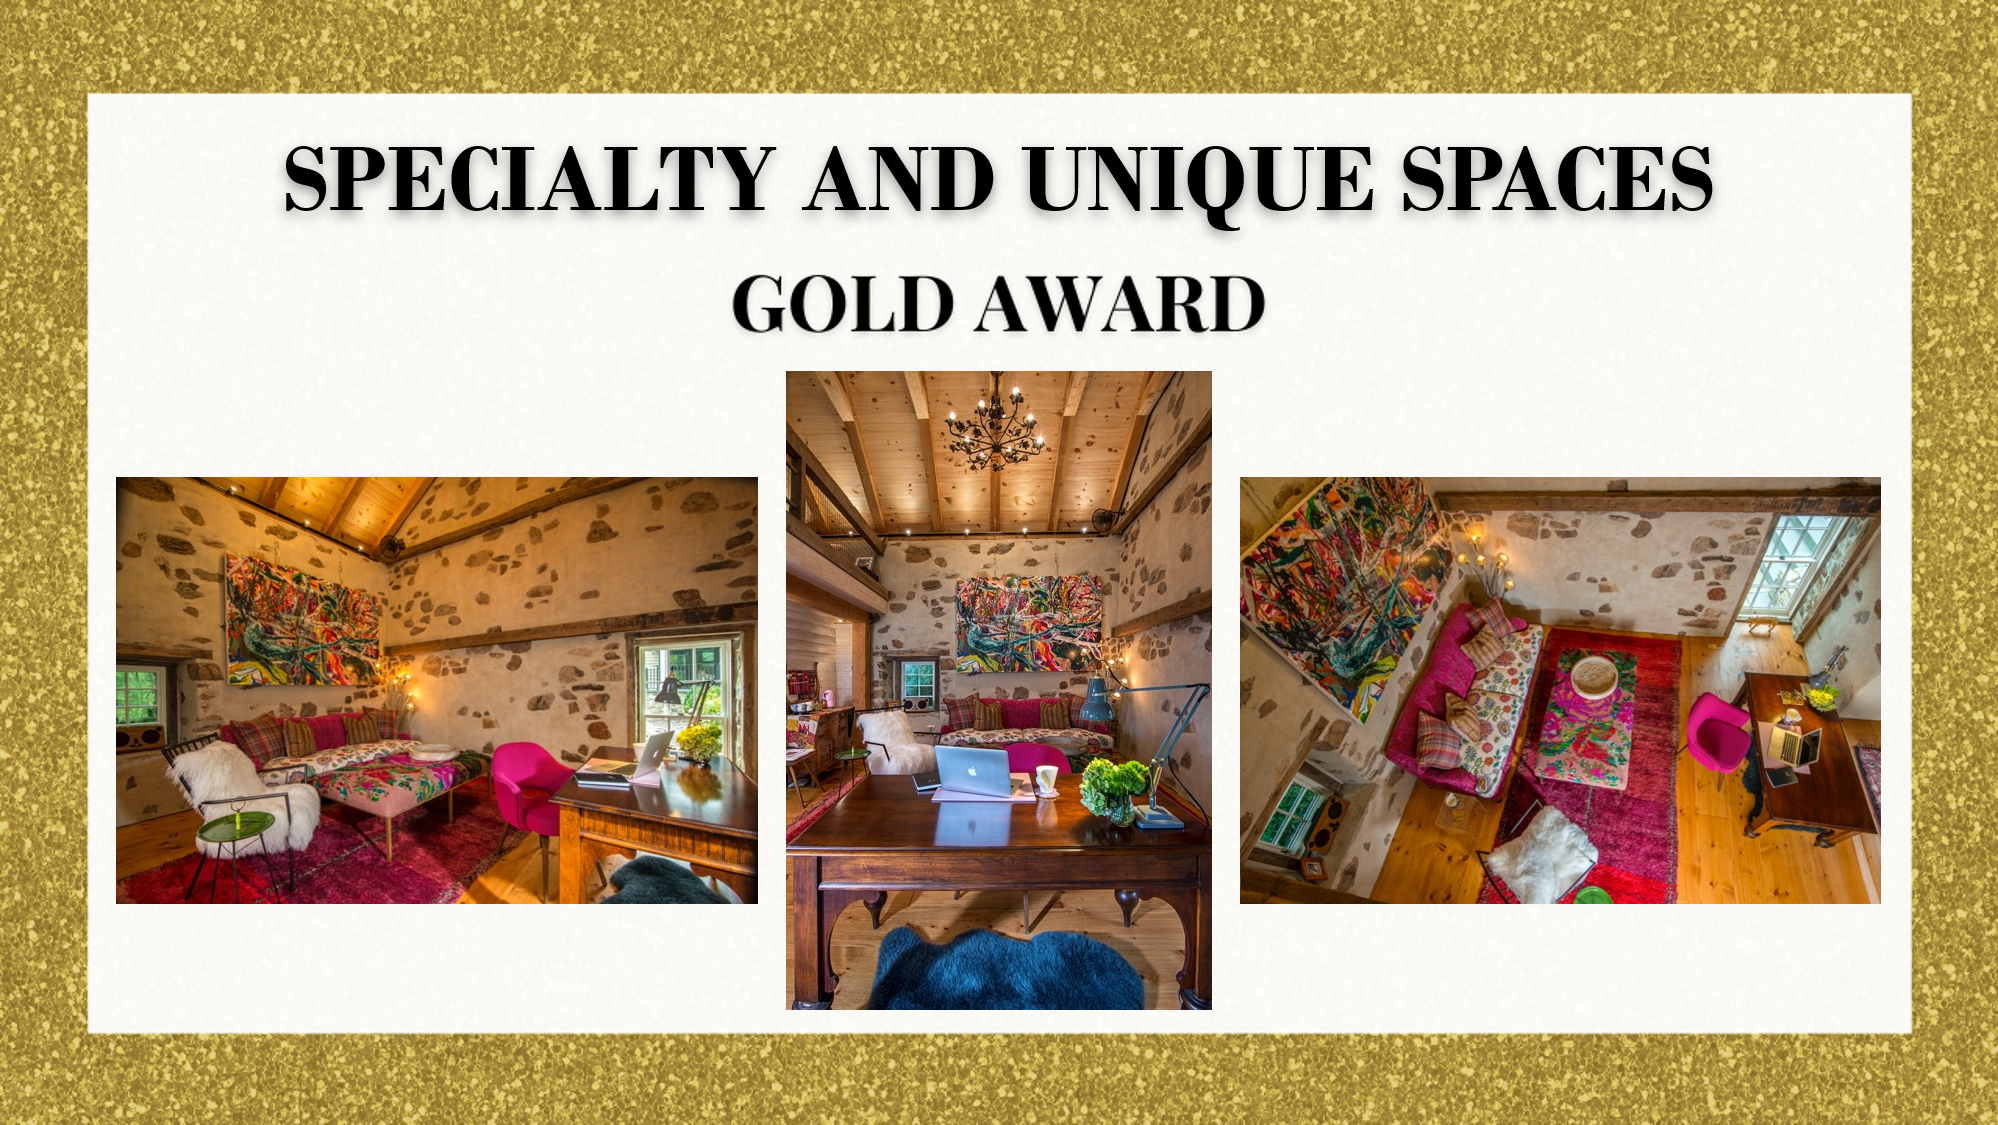 Gold Award Specialty and Unique Spaces